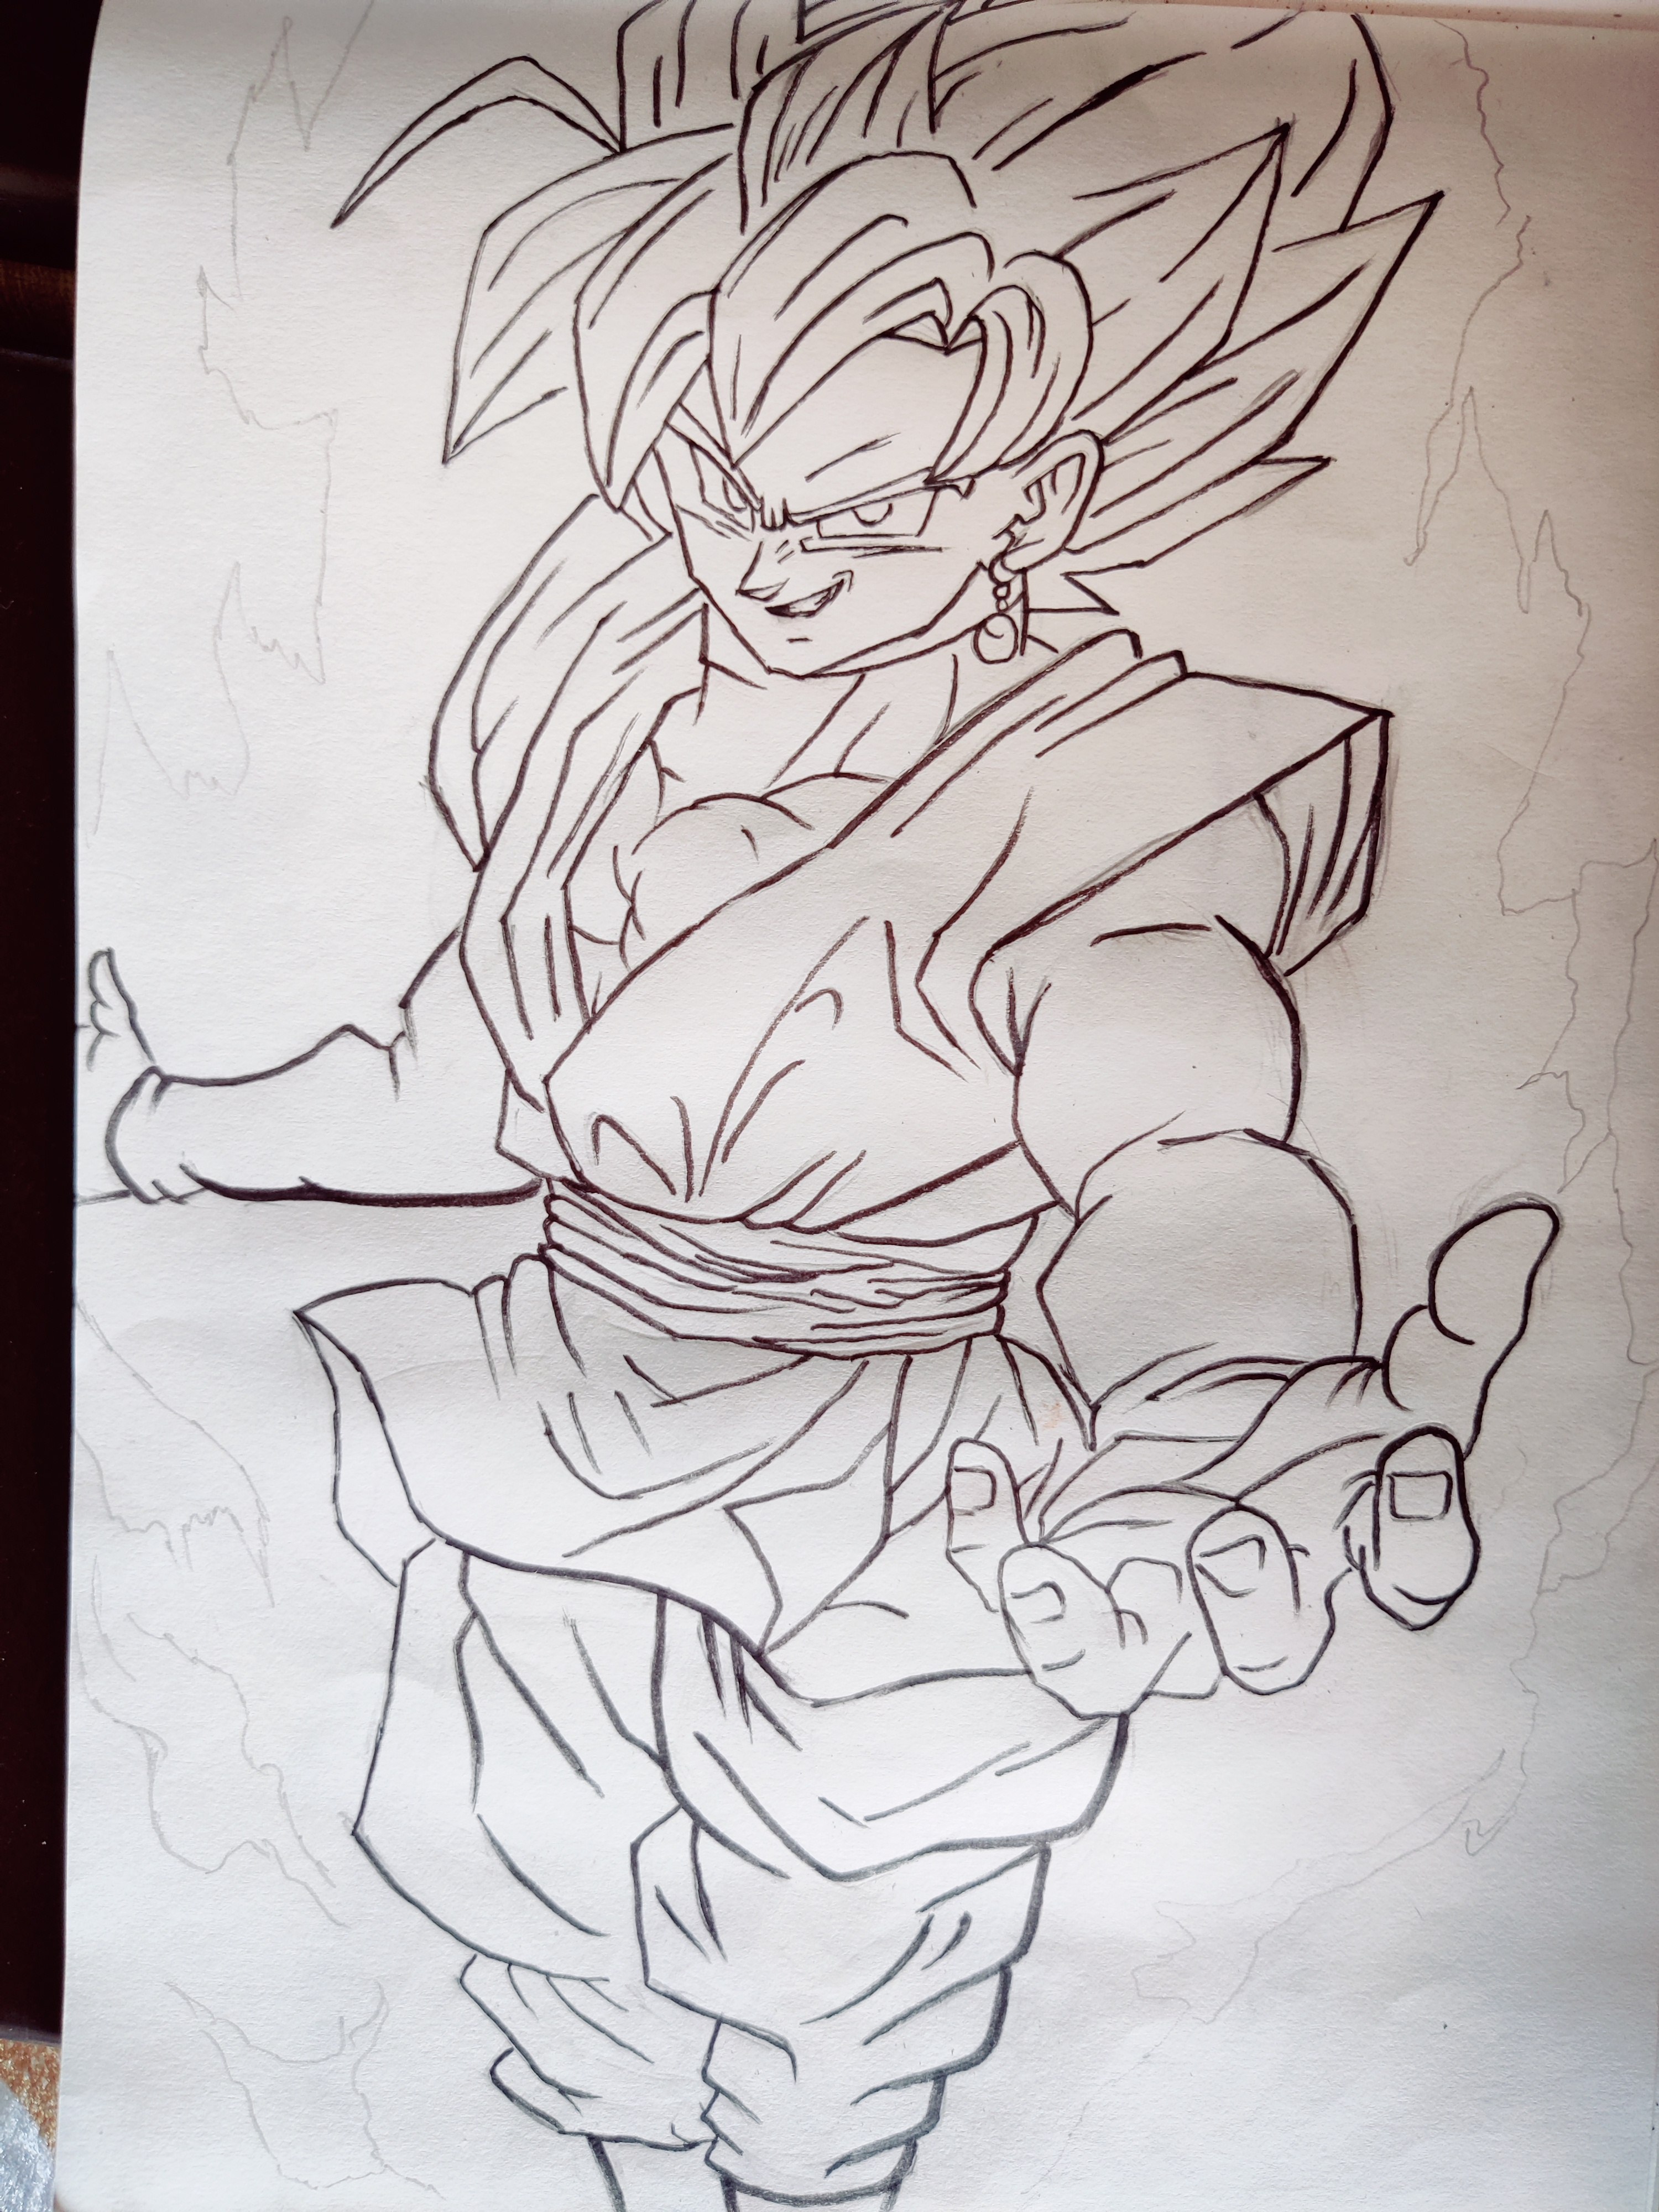 Dragon Ball Super Artist Toyotaro Reflects on His First Time Drawing Goku